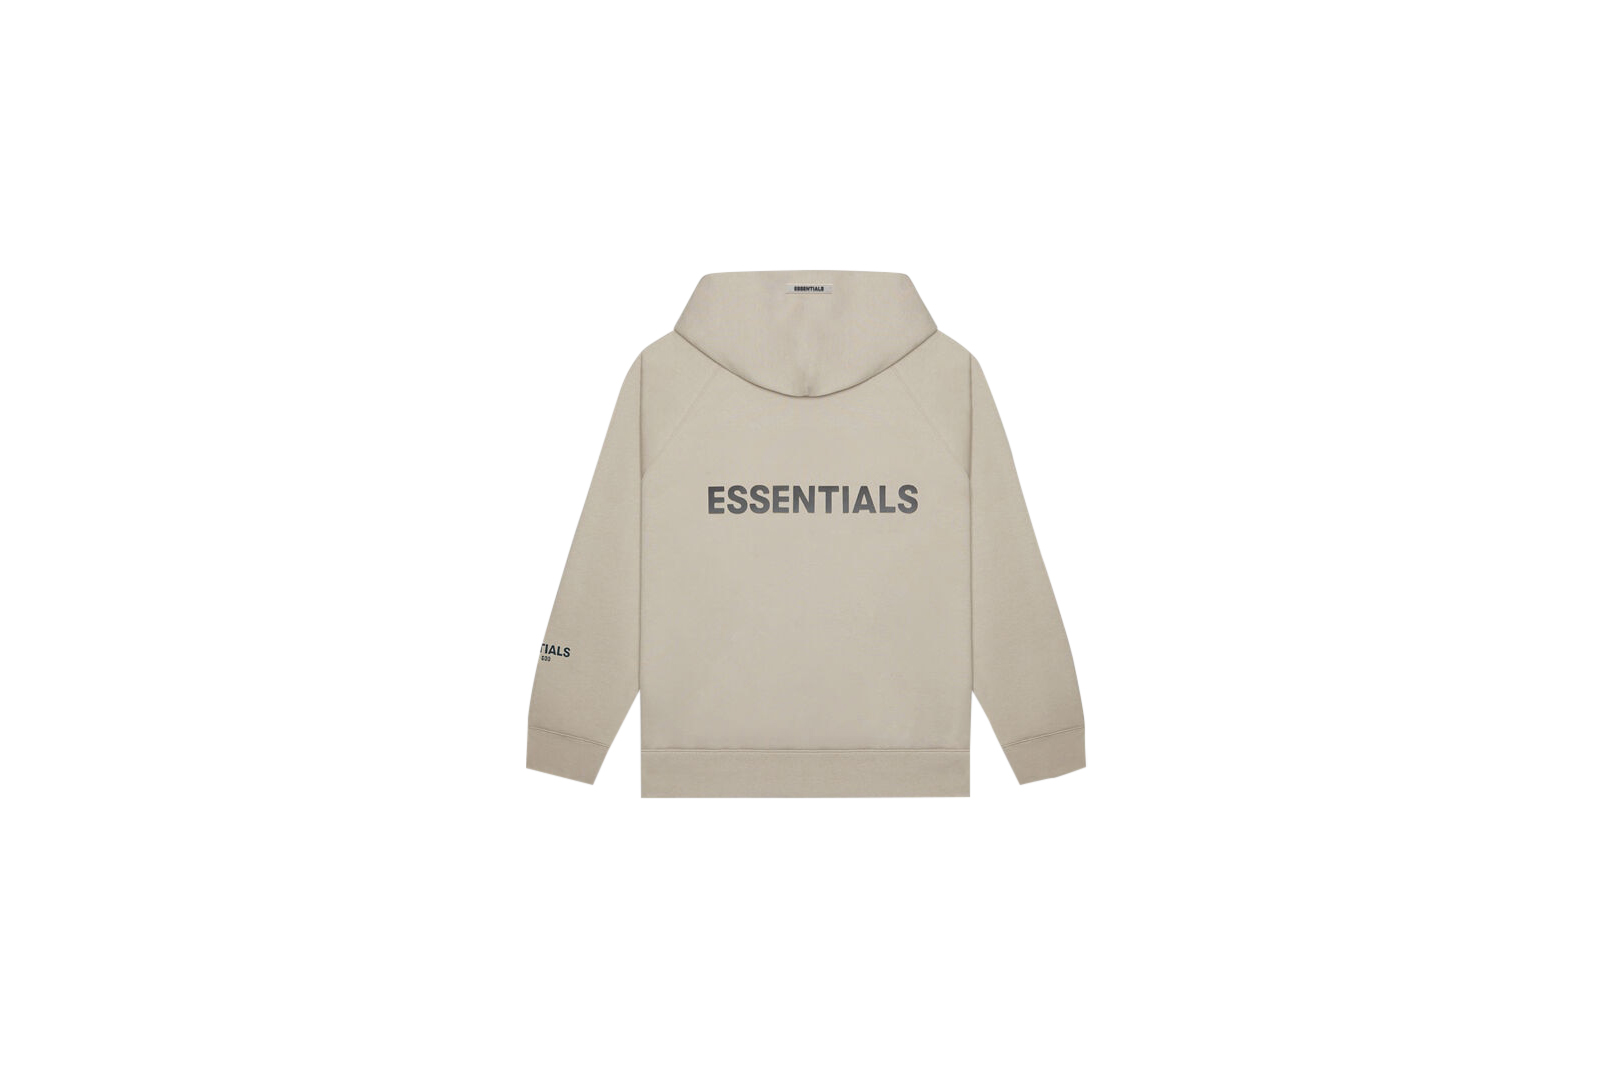 Fear of God Essentials 3D Silicon Applique Full Zip Up Hoodie String - SS20  - US